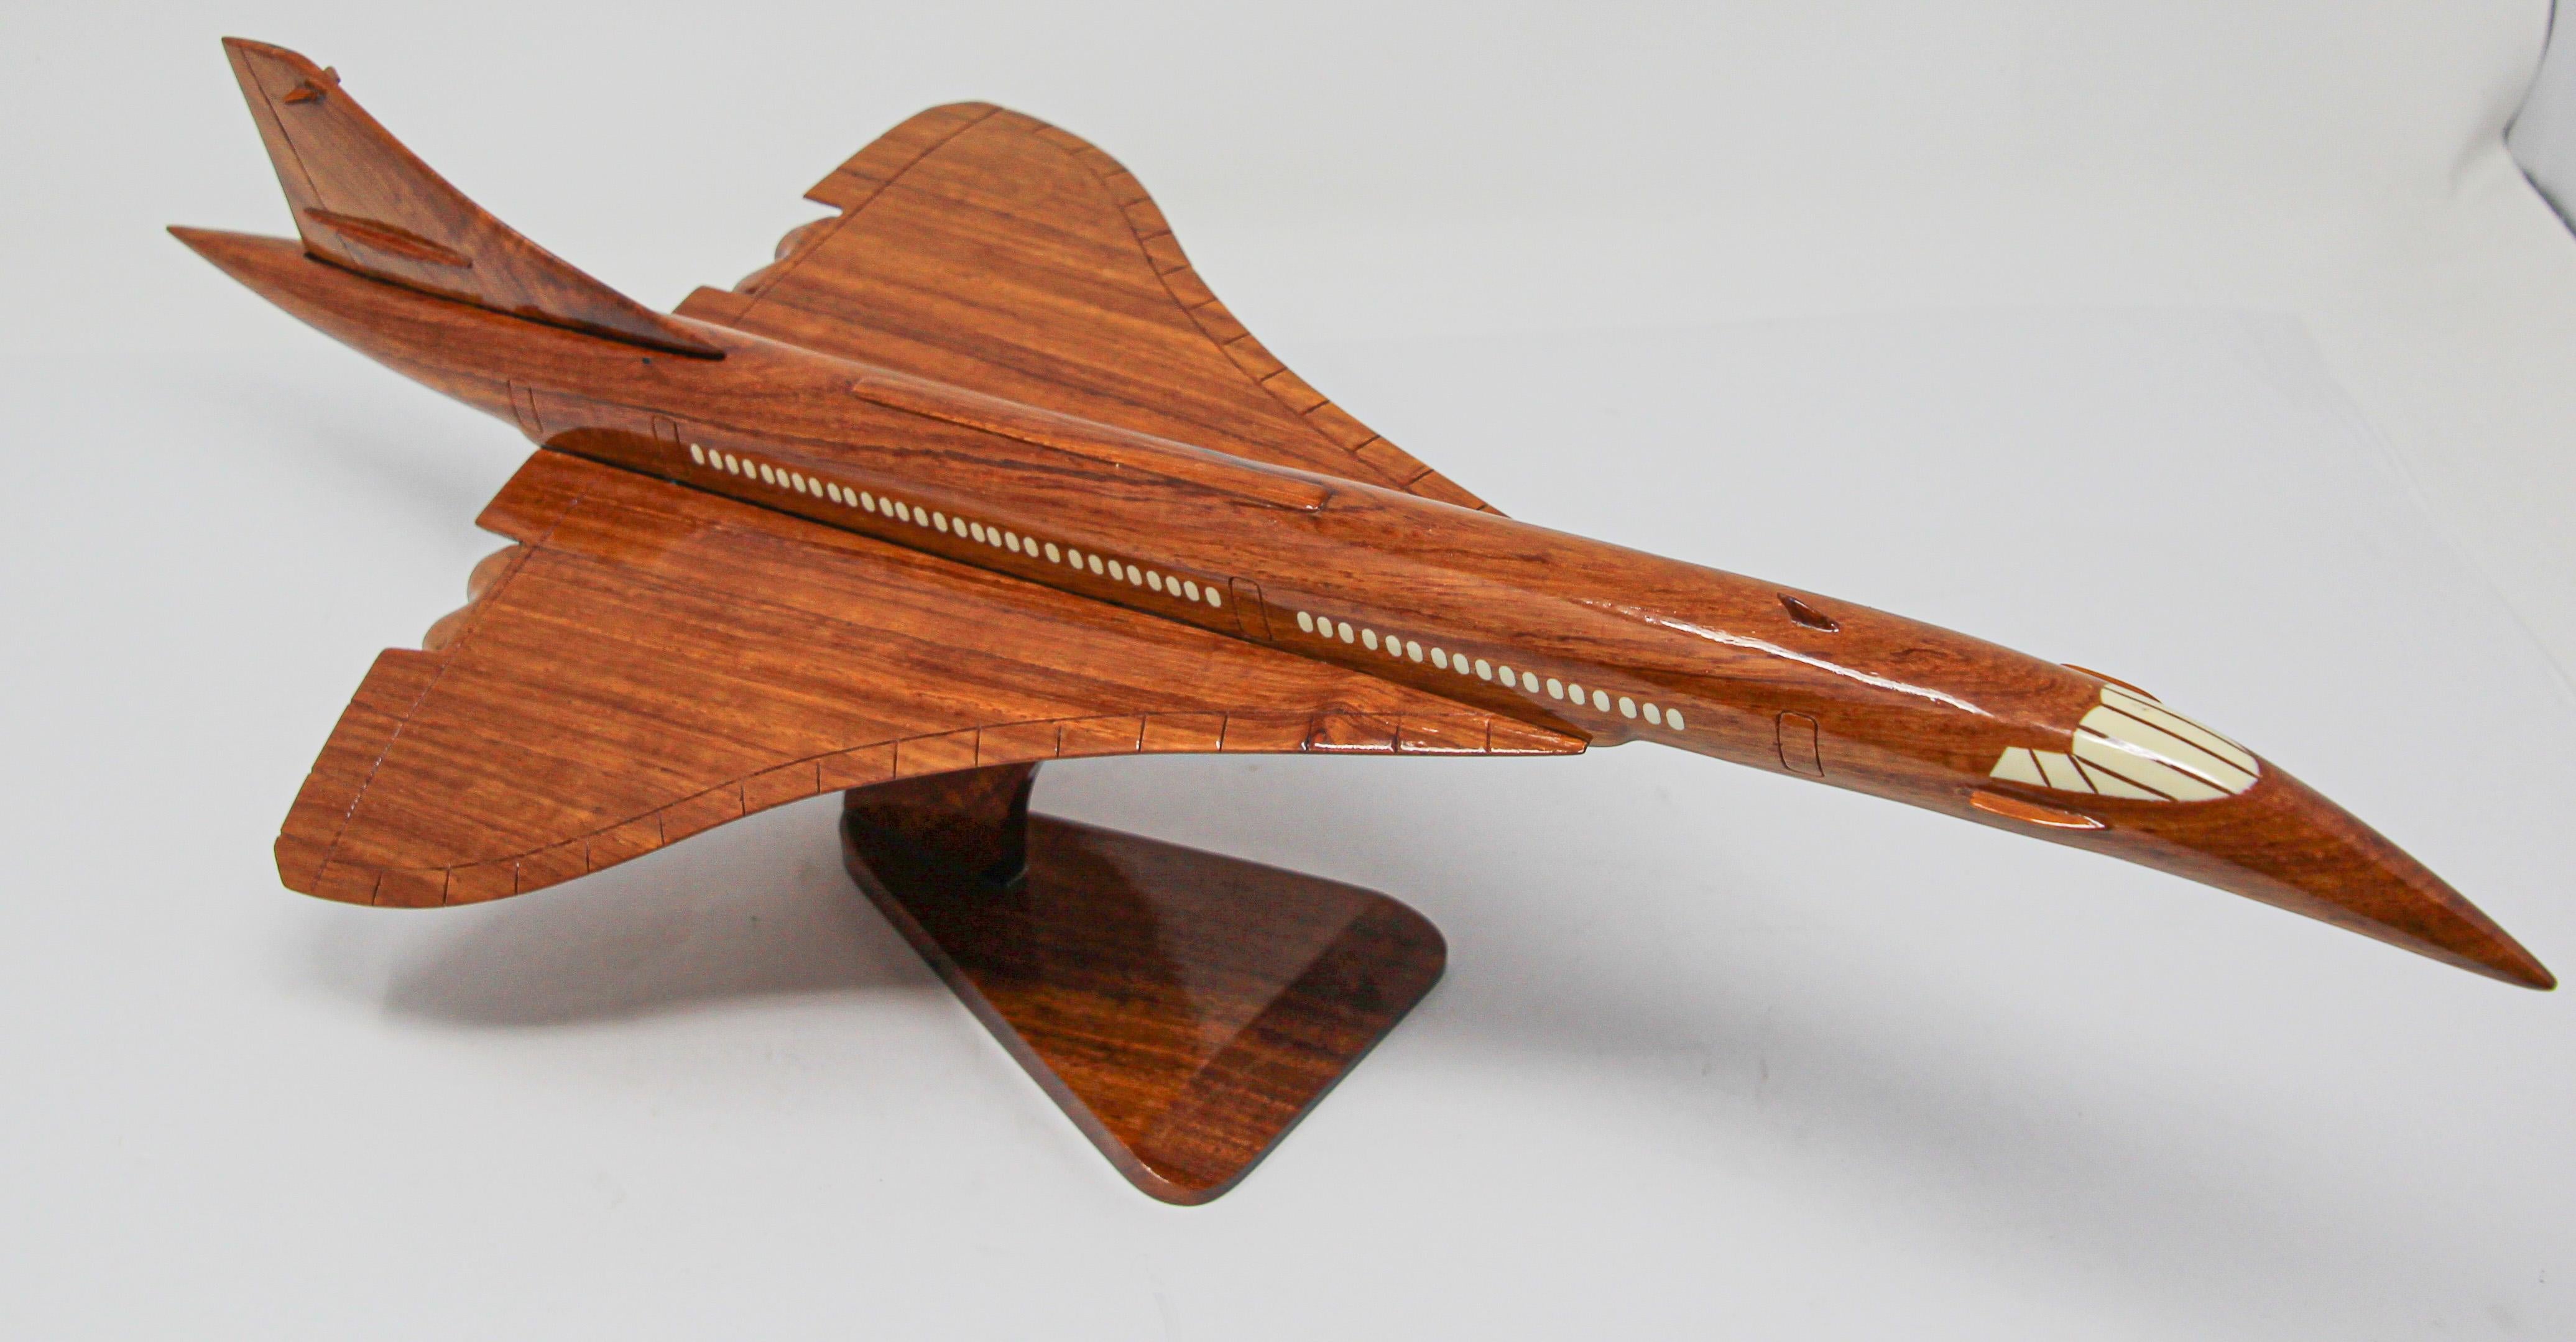 Model Concorde supersonic with light wooden body, 
The Concorde, iconic in shape and ahead of its time.
This sleek elongated model of the supersonic Concorde aircraft exhibits a beautifully crafted fuselage in fruit wood.
Plane model of the